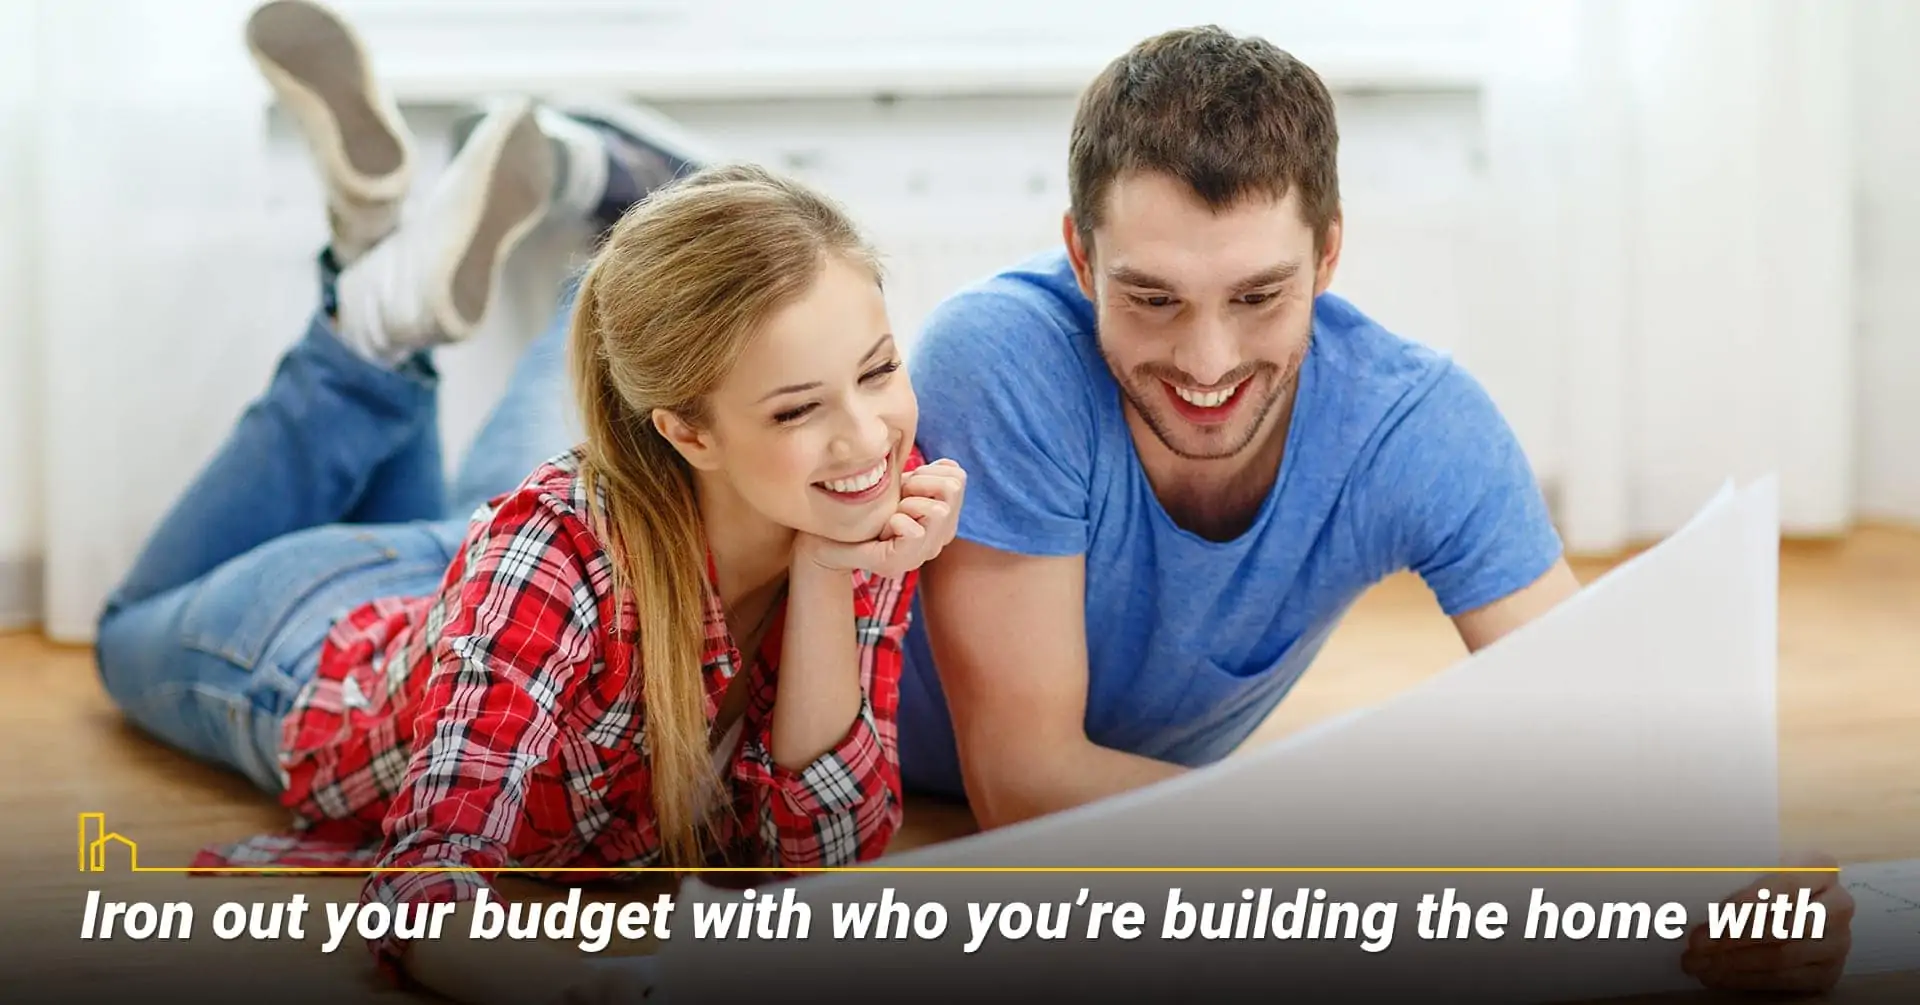 Iron out your budget, start by reviewing your budget